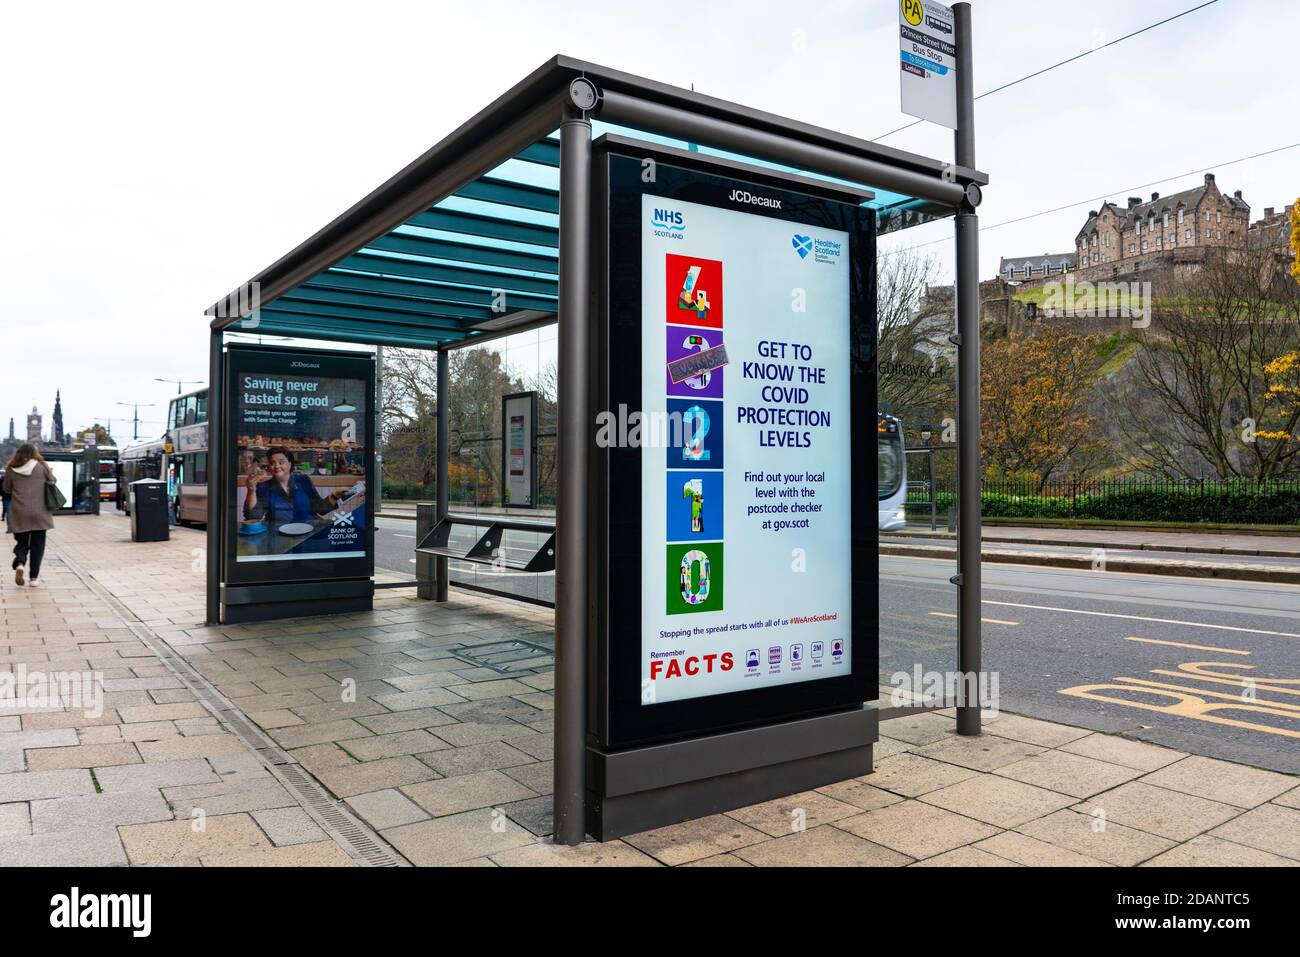 Edinburgh, Scotland, UK. 14 November 2020. Views of Edinburgh city centre on Saturday afternoon during a level 3 lockdown imposed by the Scottish Government;.Pictured; Coronavirus health advisory notices on video displays on bus shelters. Iain Masterton/Alamy Live News. Stock Photo